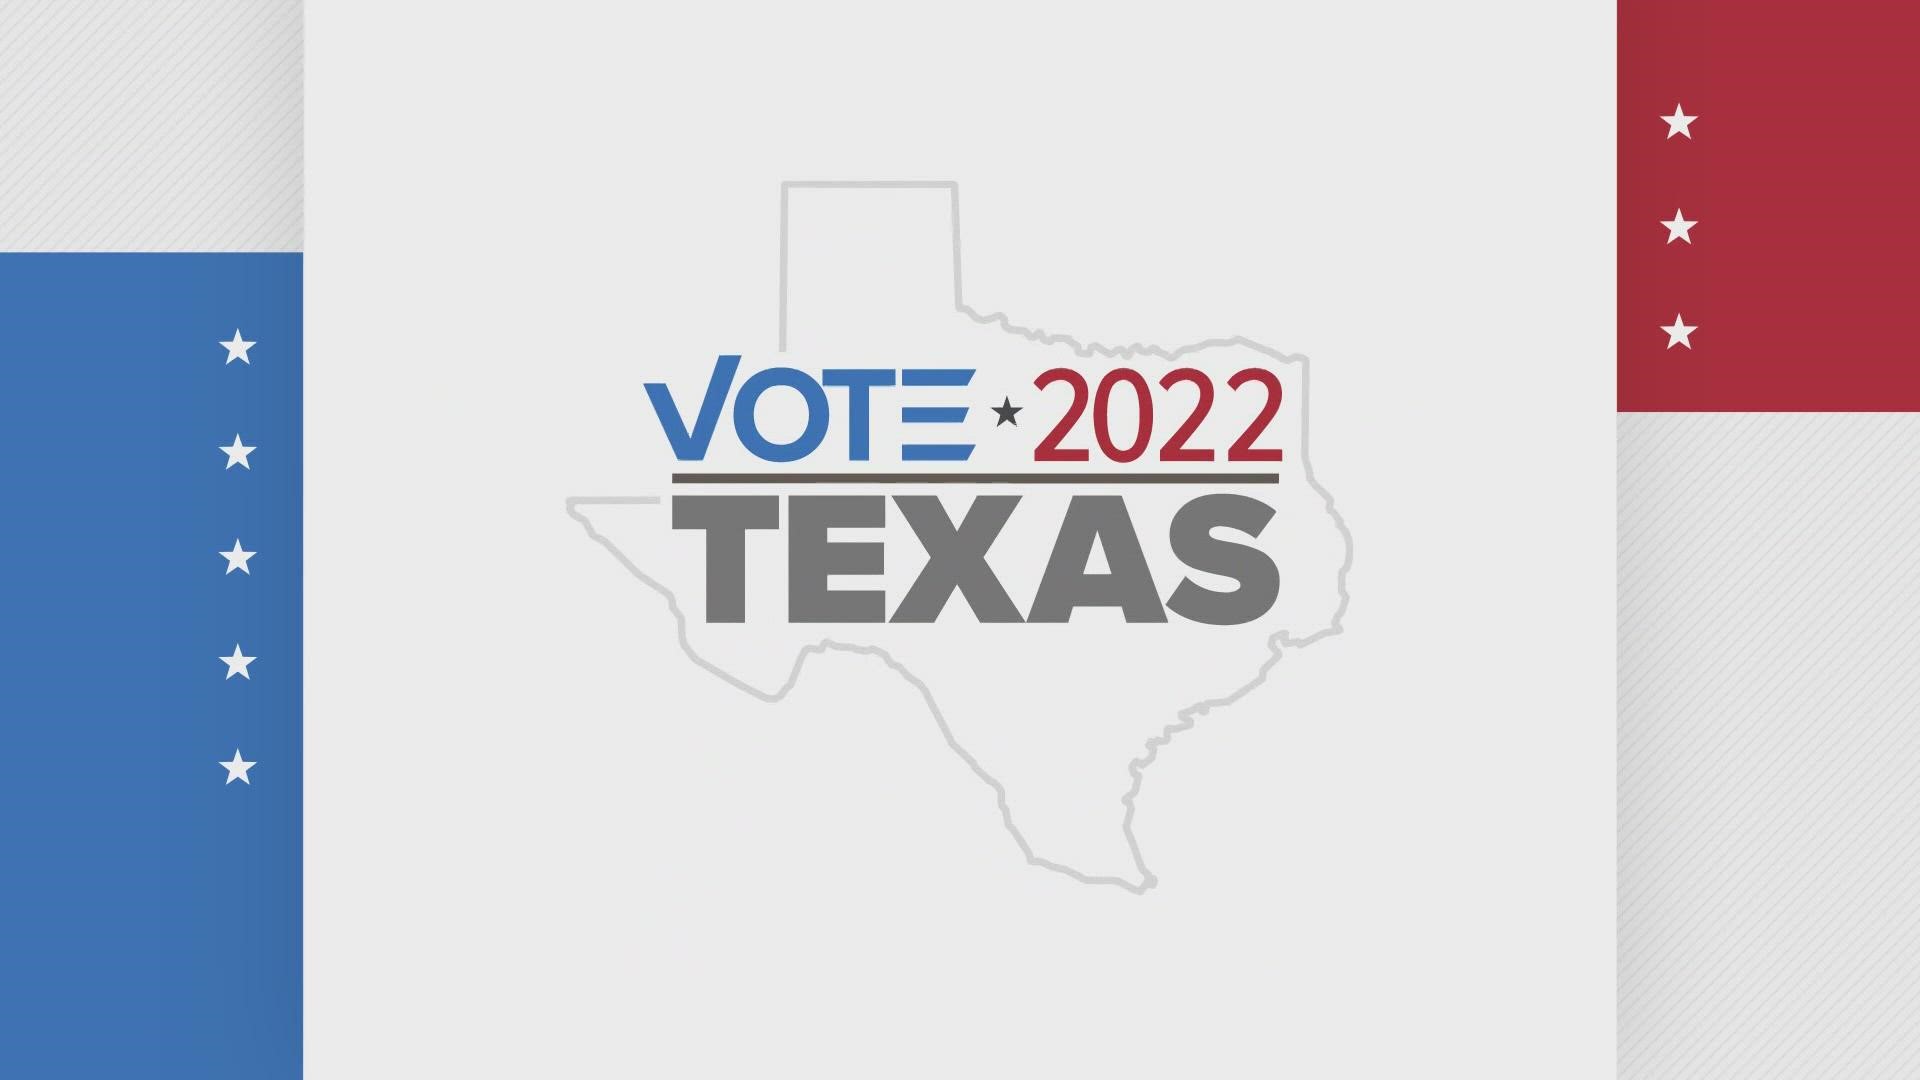 Several organizations in Dallas are working to make sure everyone in Texas is registered to vote in the upcoming election.